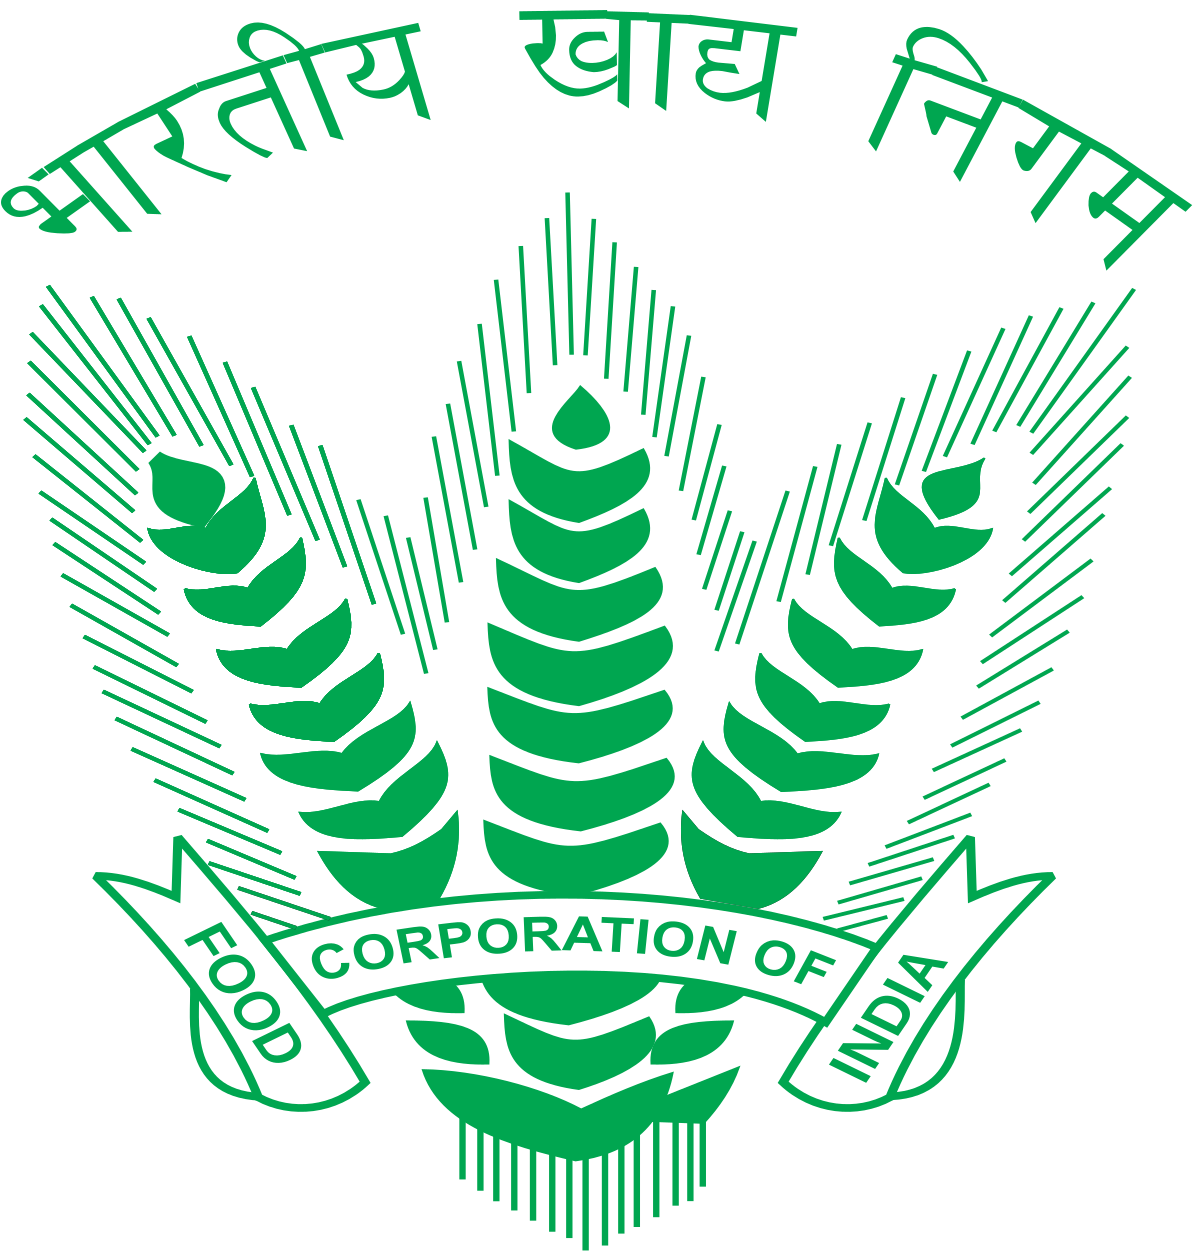 4710 posts at Food Corporation of India (FCI) 